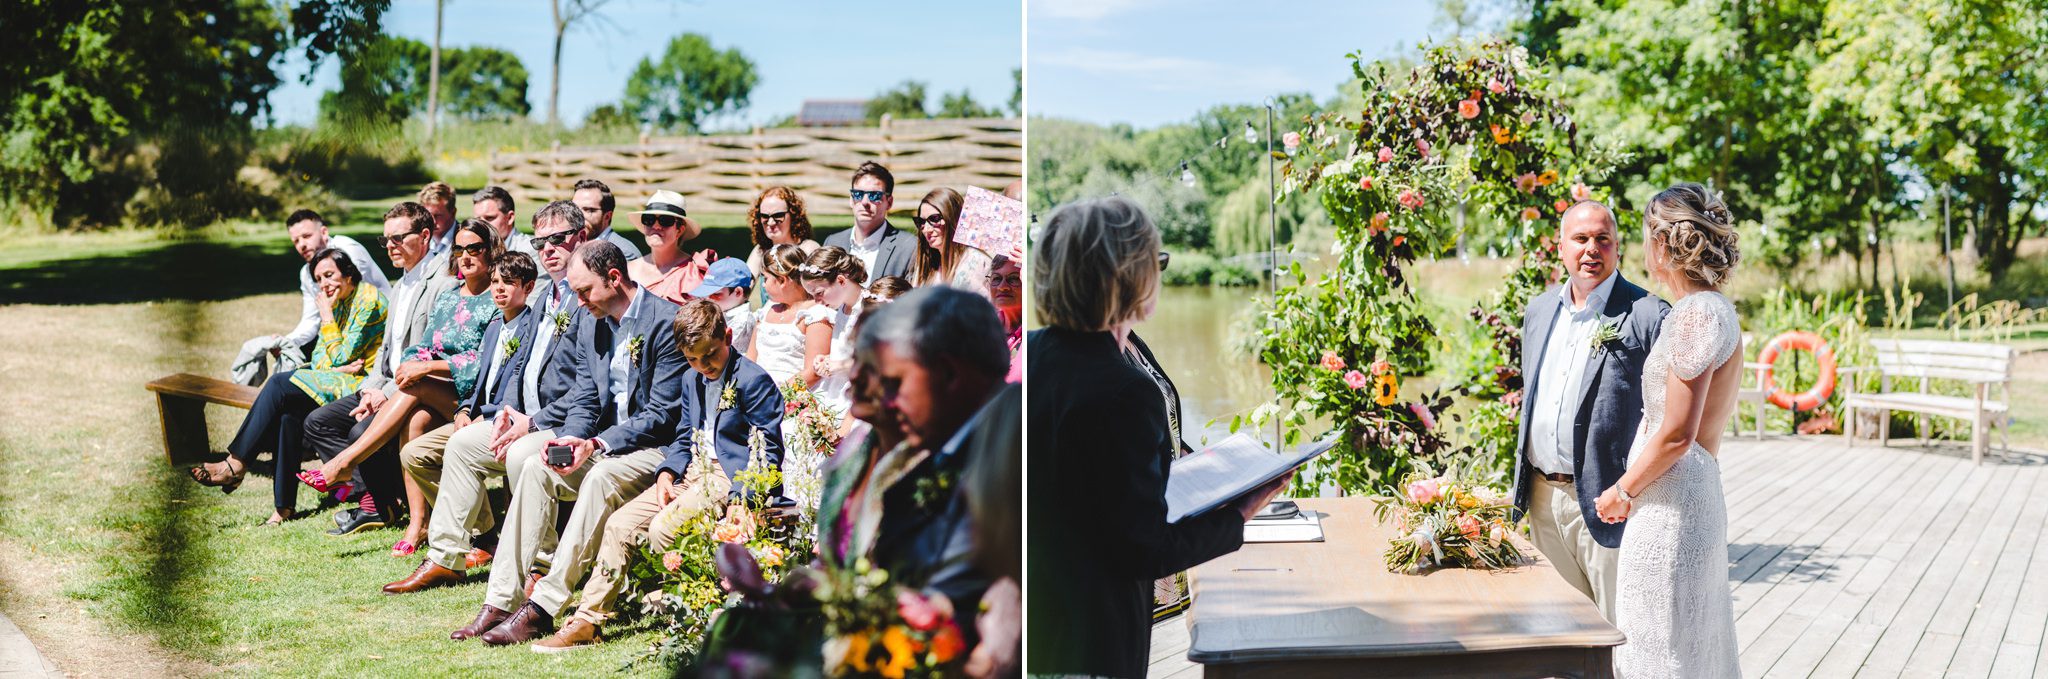 An outdoor lakeside wedding ceremony